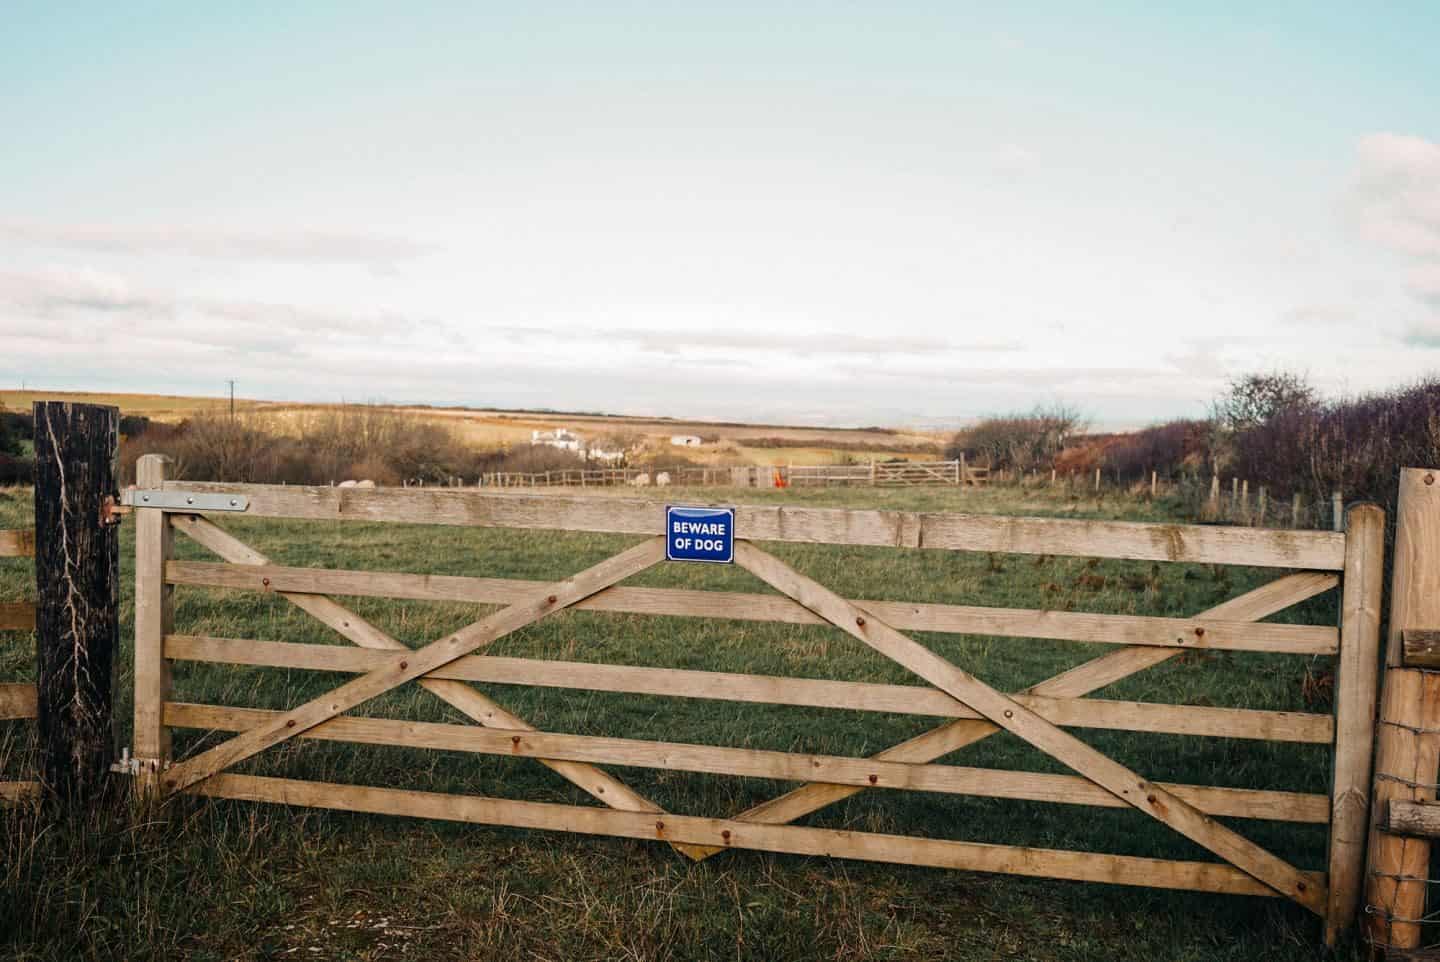 A gate in a field with a beware the dog enamel sign on it